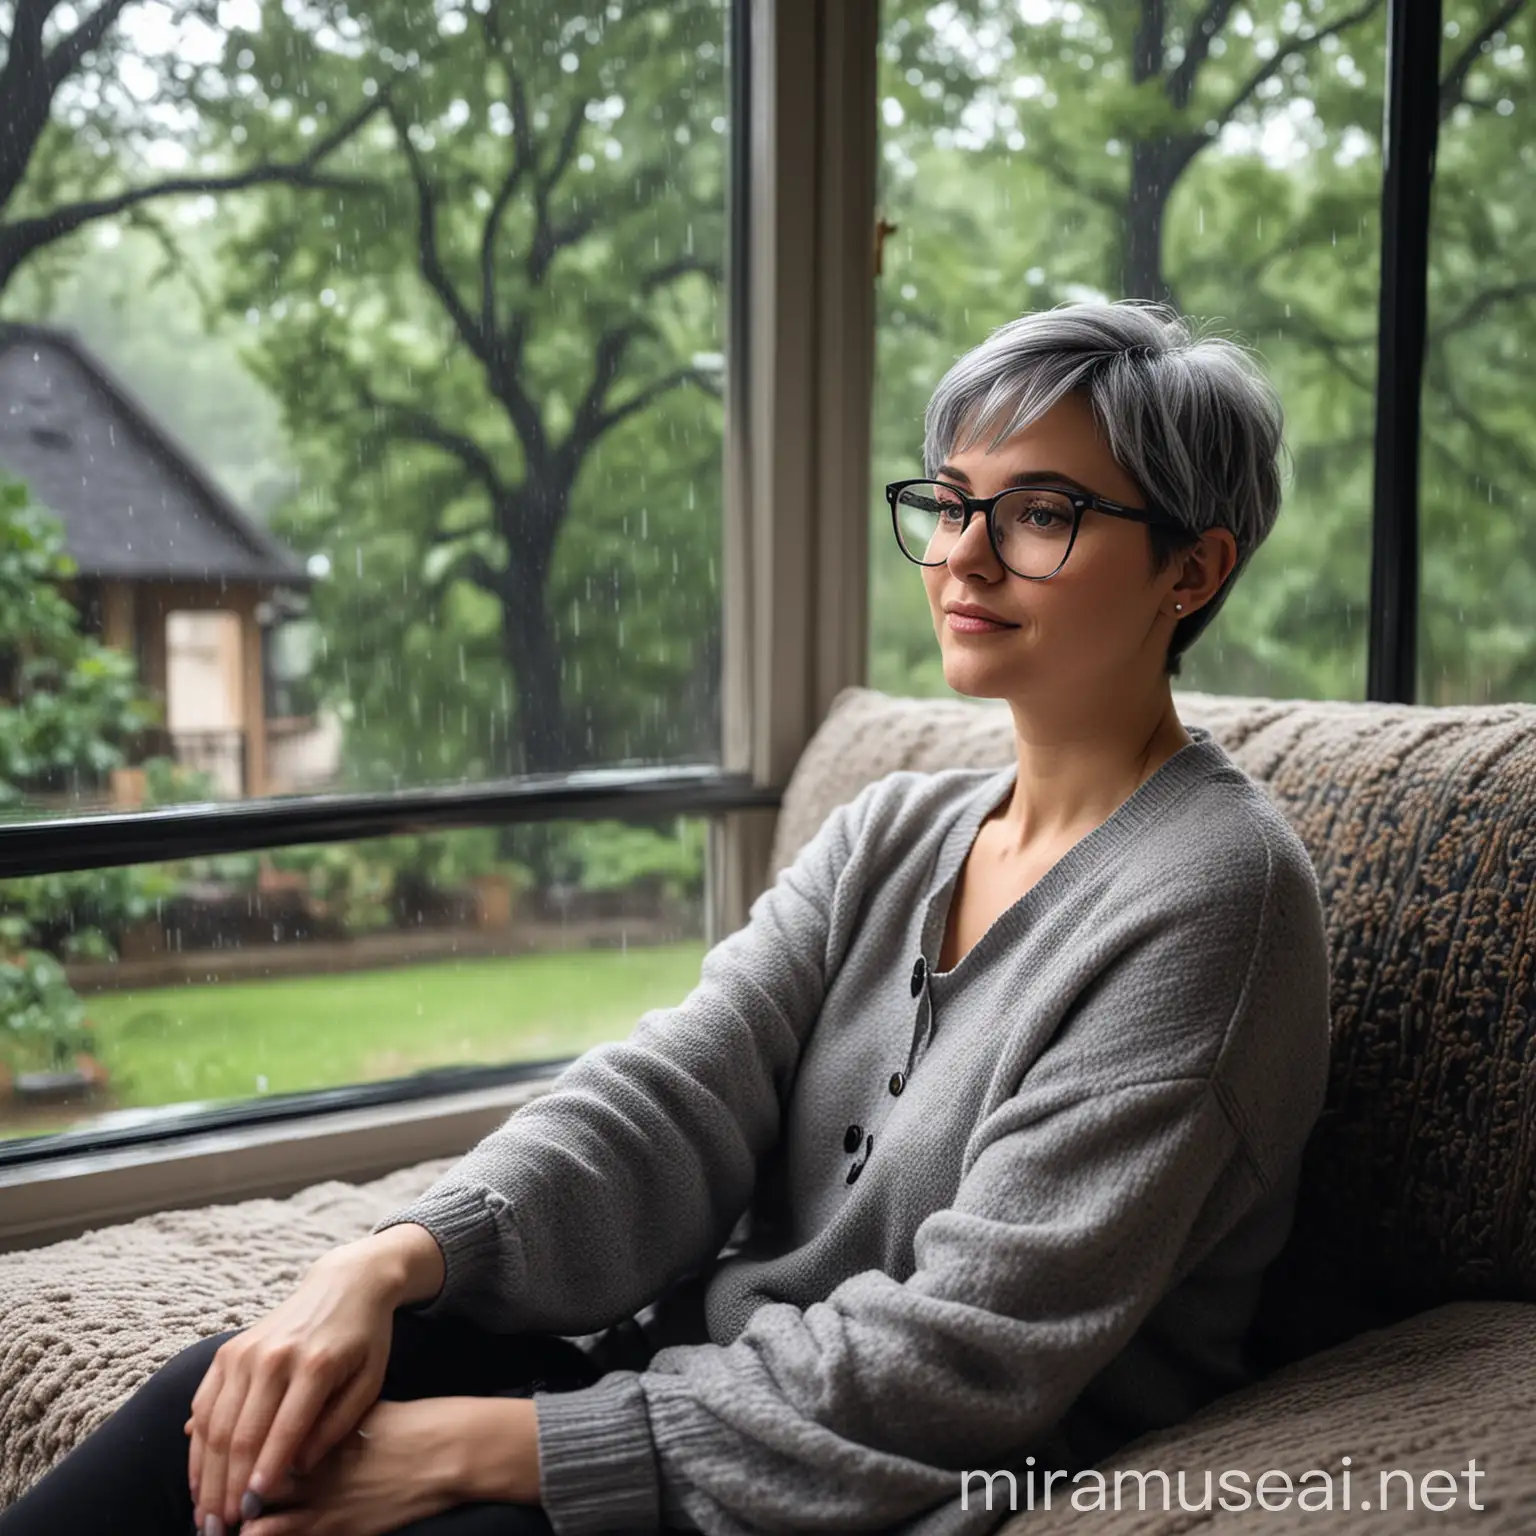 Relaxing Woman with Black and Silver Hair Enjoying Rainy Day in Cozy Cottage Setting